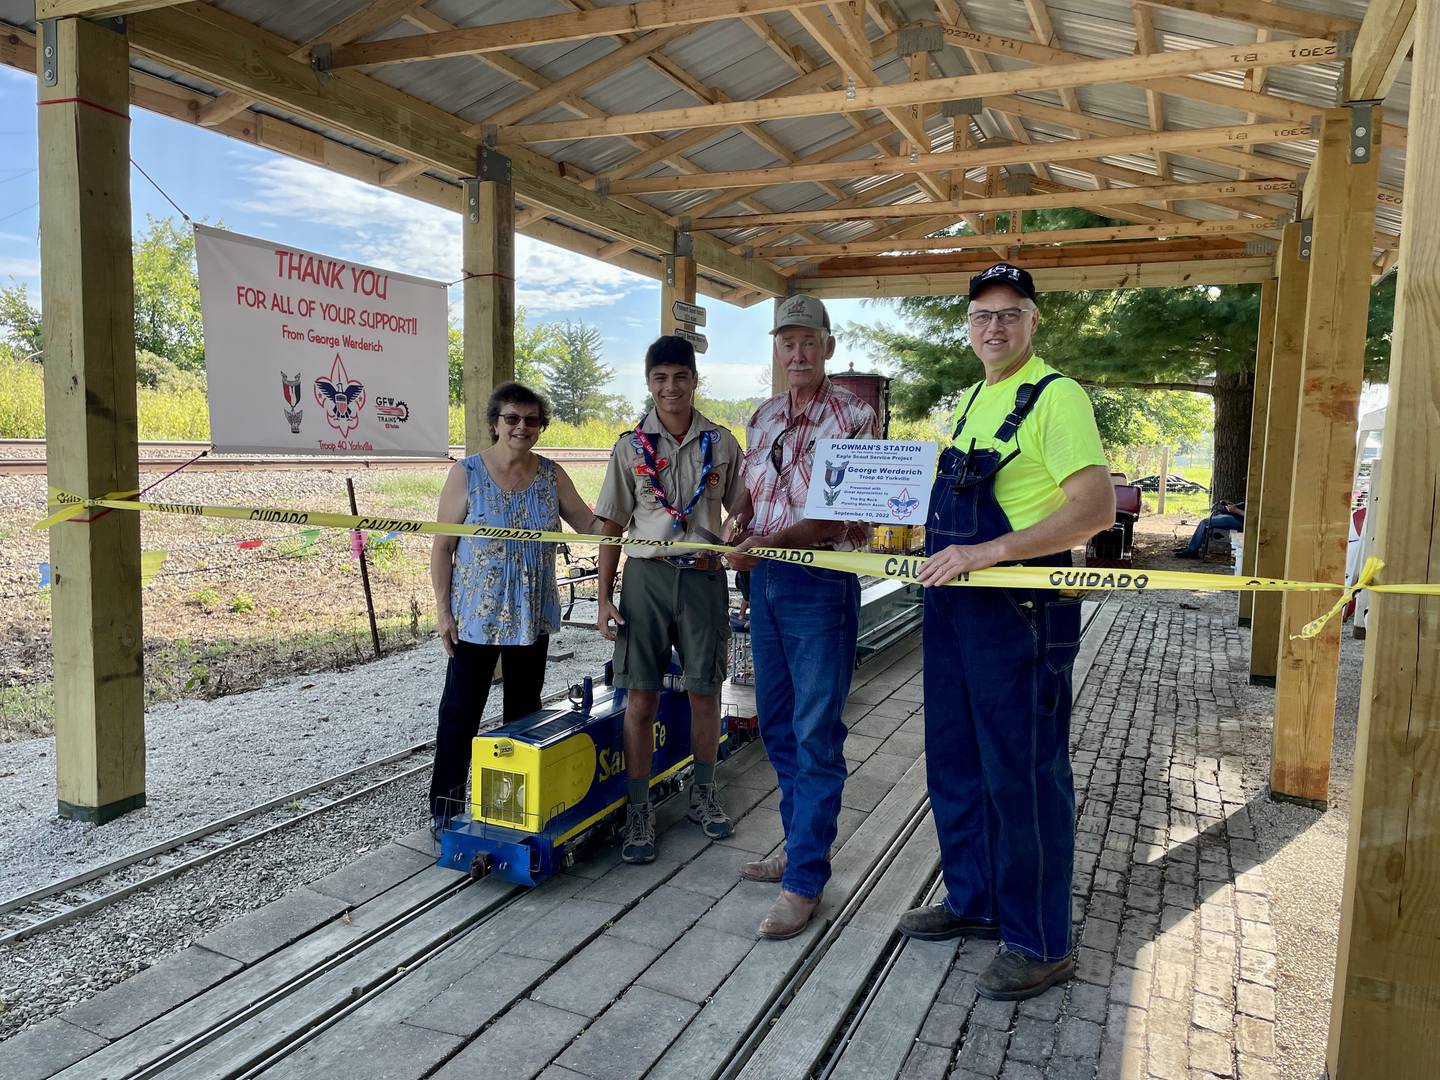 George Werderich presented Plowman's Station to officials from the Prairie State Railroad Club and Big Rock Plowing Match Association. (from left to right: Denise Farrugia, George Werderich, Terry Sorensen, and Bill Kobernus) (Photo provided)